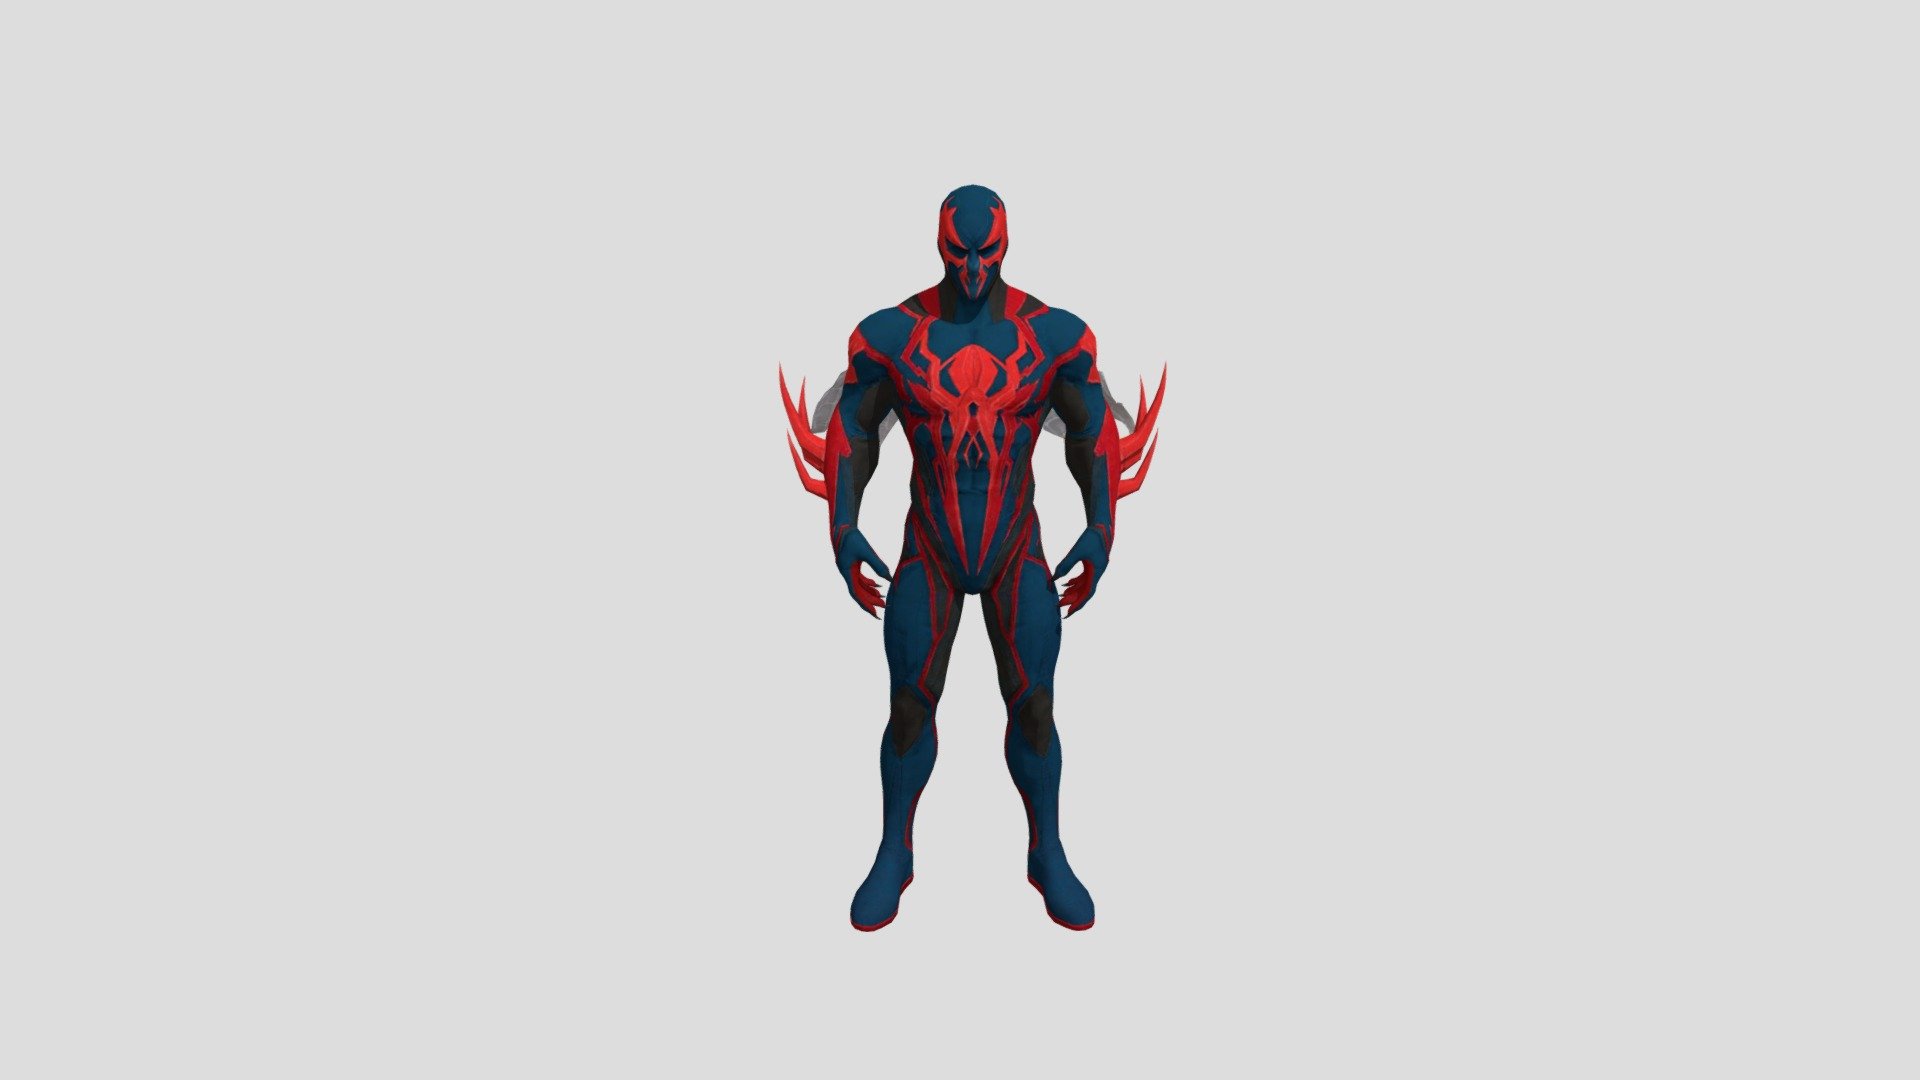 Spider-Man 2099 is a fictional superhero appearing in American comic books published by Marvel Comics. The character was created by Peter David and Rick Leonardi in 1992 for the Marvel 2099 comic book line, and is a futuristic re-imagining of his namesake created by Stan Lee and Steve Ditko. His real identity is Miguel O'Hara, a brilliant Irish-Mexican geneticist living in Nueva York (a renamed New York City) in the year 2099 who attempts to recreate the abilities of the original Spider-Man in other people and later suffers a related accident that causes half of his DNA to be re-written with a spider's genetic code.[1]

The character has appeared in numerous media adaptations, while making his cinematic debut in the animated film Spider-Man: Into the Spider-Verse, where he was voiced by Oscar Isaac in the film's post-credits scene. The character will also appear in the film's sequel, Spider-Man: Across the Spider-Verse (Part One), with Isaac reprising the role - Spiderman 2099 - 3D model by RockStudio 3d model